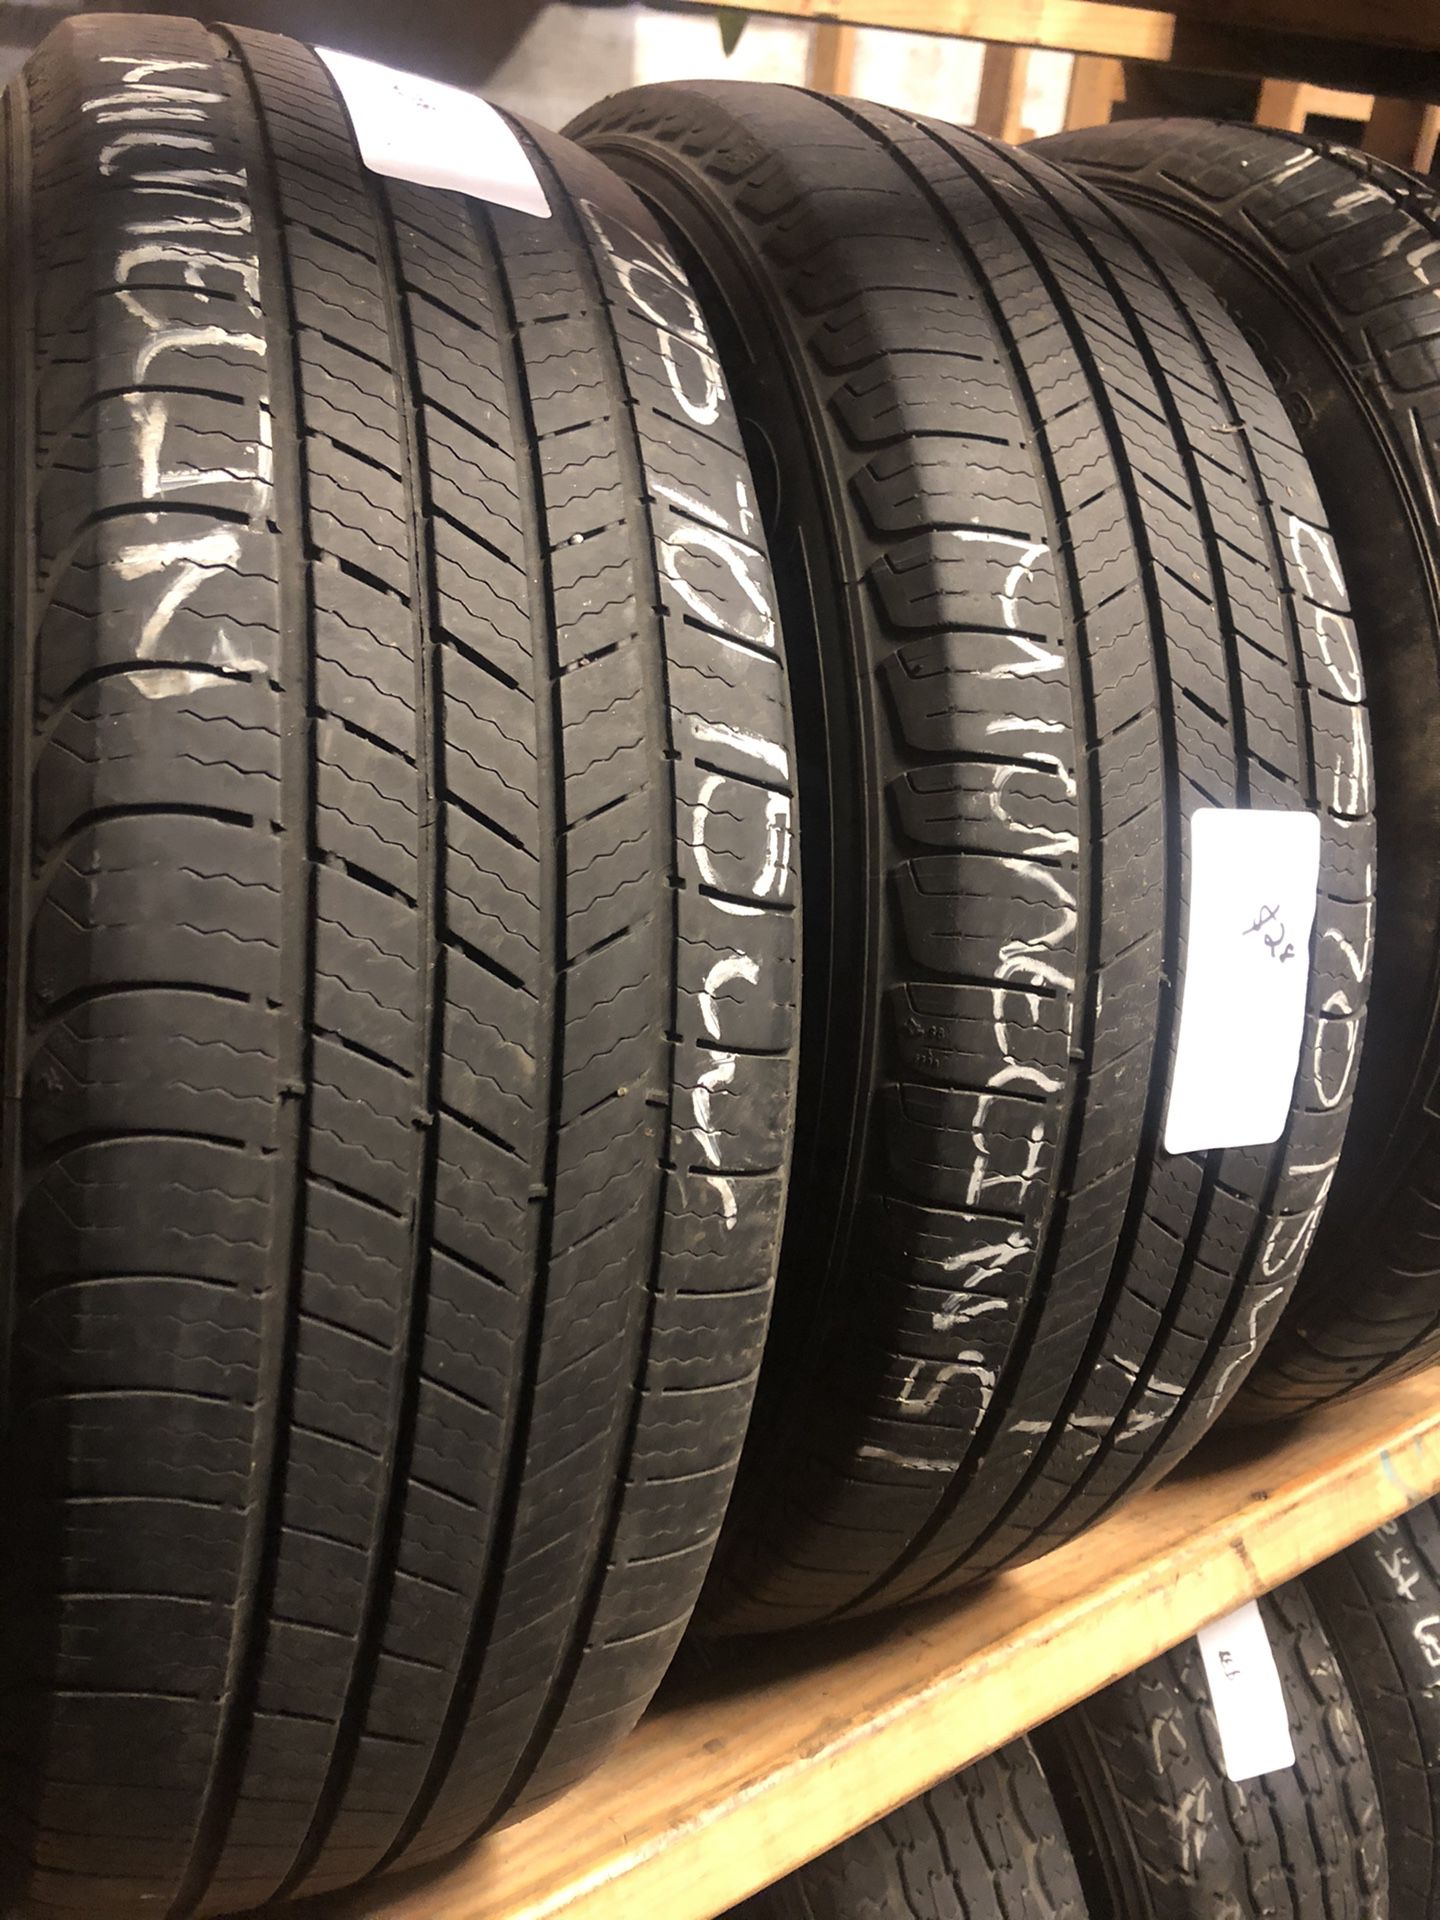 Matching Pair (2) 205 70 15 Tires For Only $28 Each With FREE INSTALL!!!